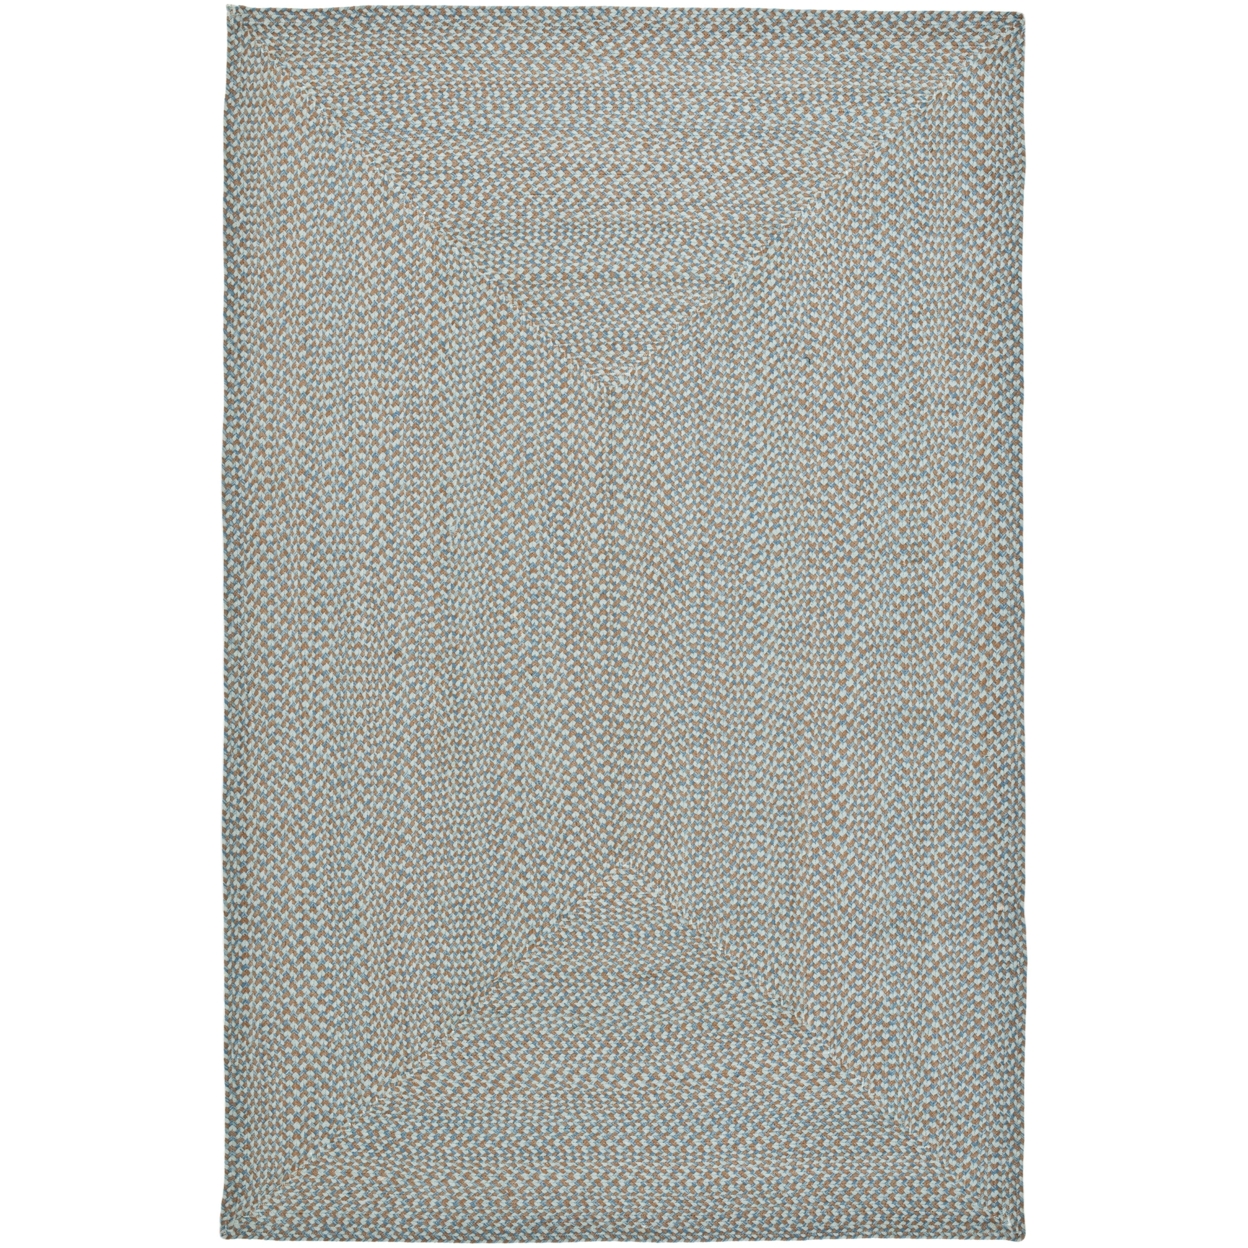 SAFAVIEH Braided Collection BRD170A Handwoven Multi Rug - 9' X 12' Oval